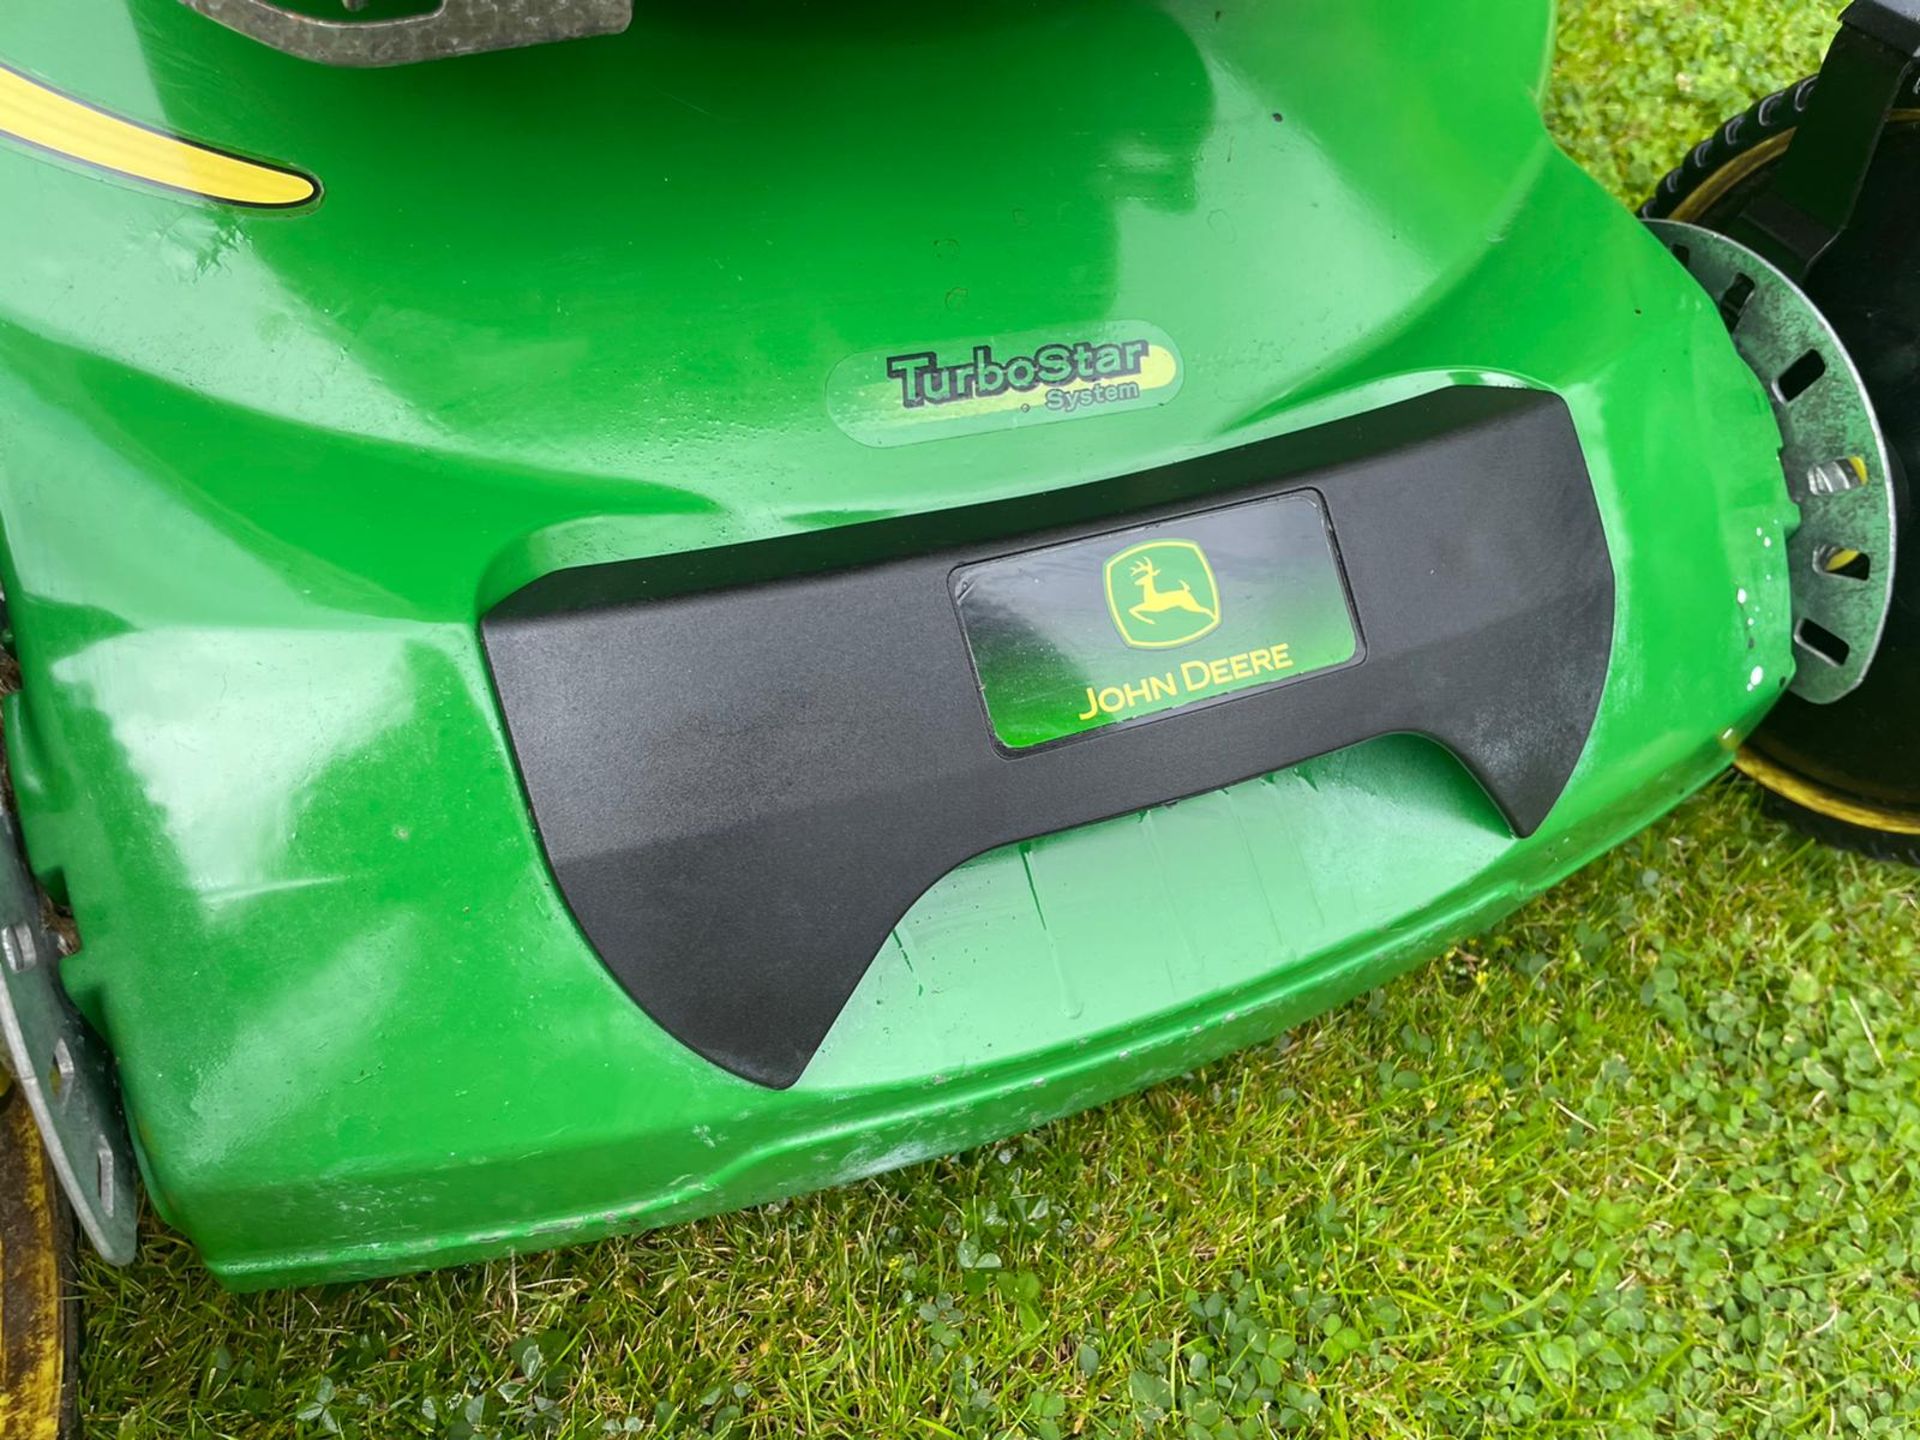 JOHN DEERE R54RKB SELF PROPELLED ROLLER LAWN MOWER WITH REAR COLLECTOR, RUNS DRIVES CUTS *NO VAT* - Image 9 of 9